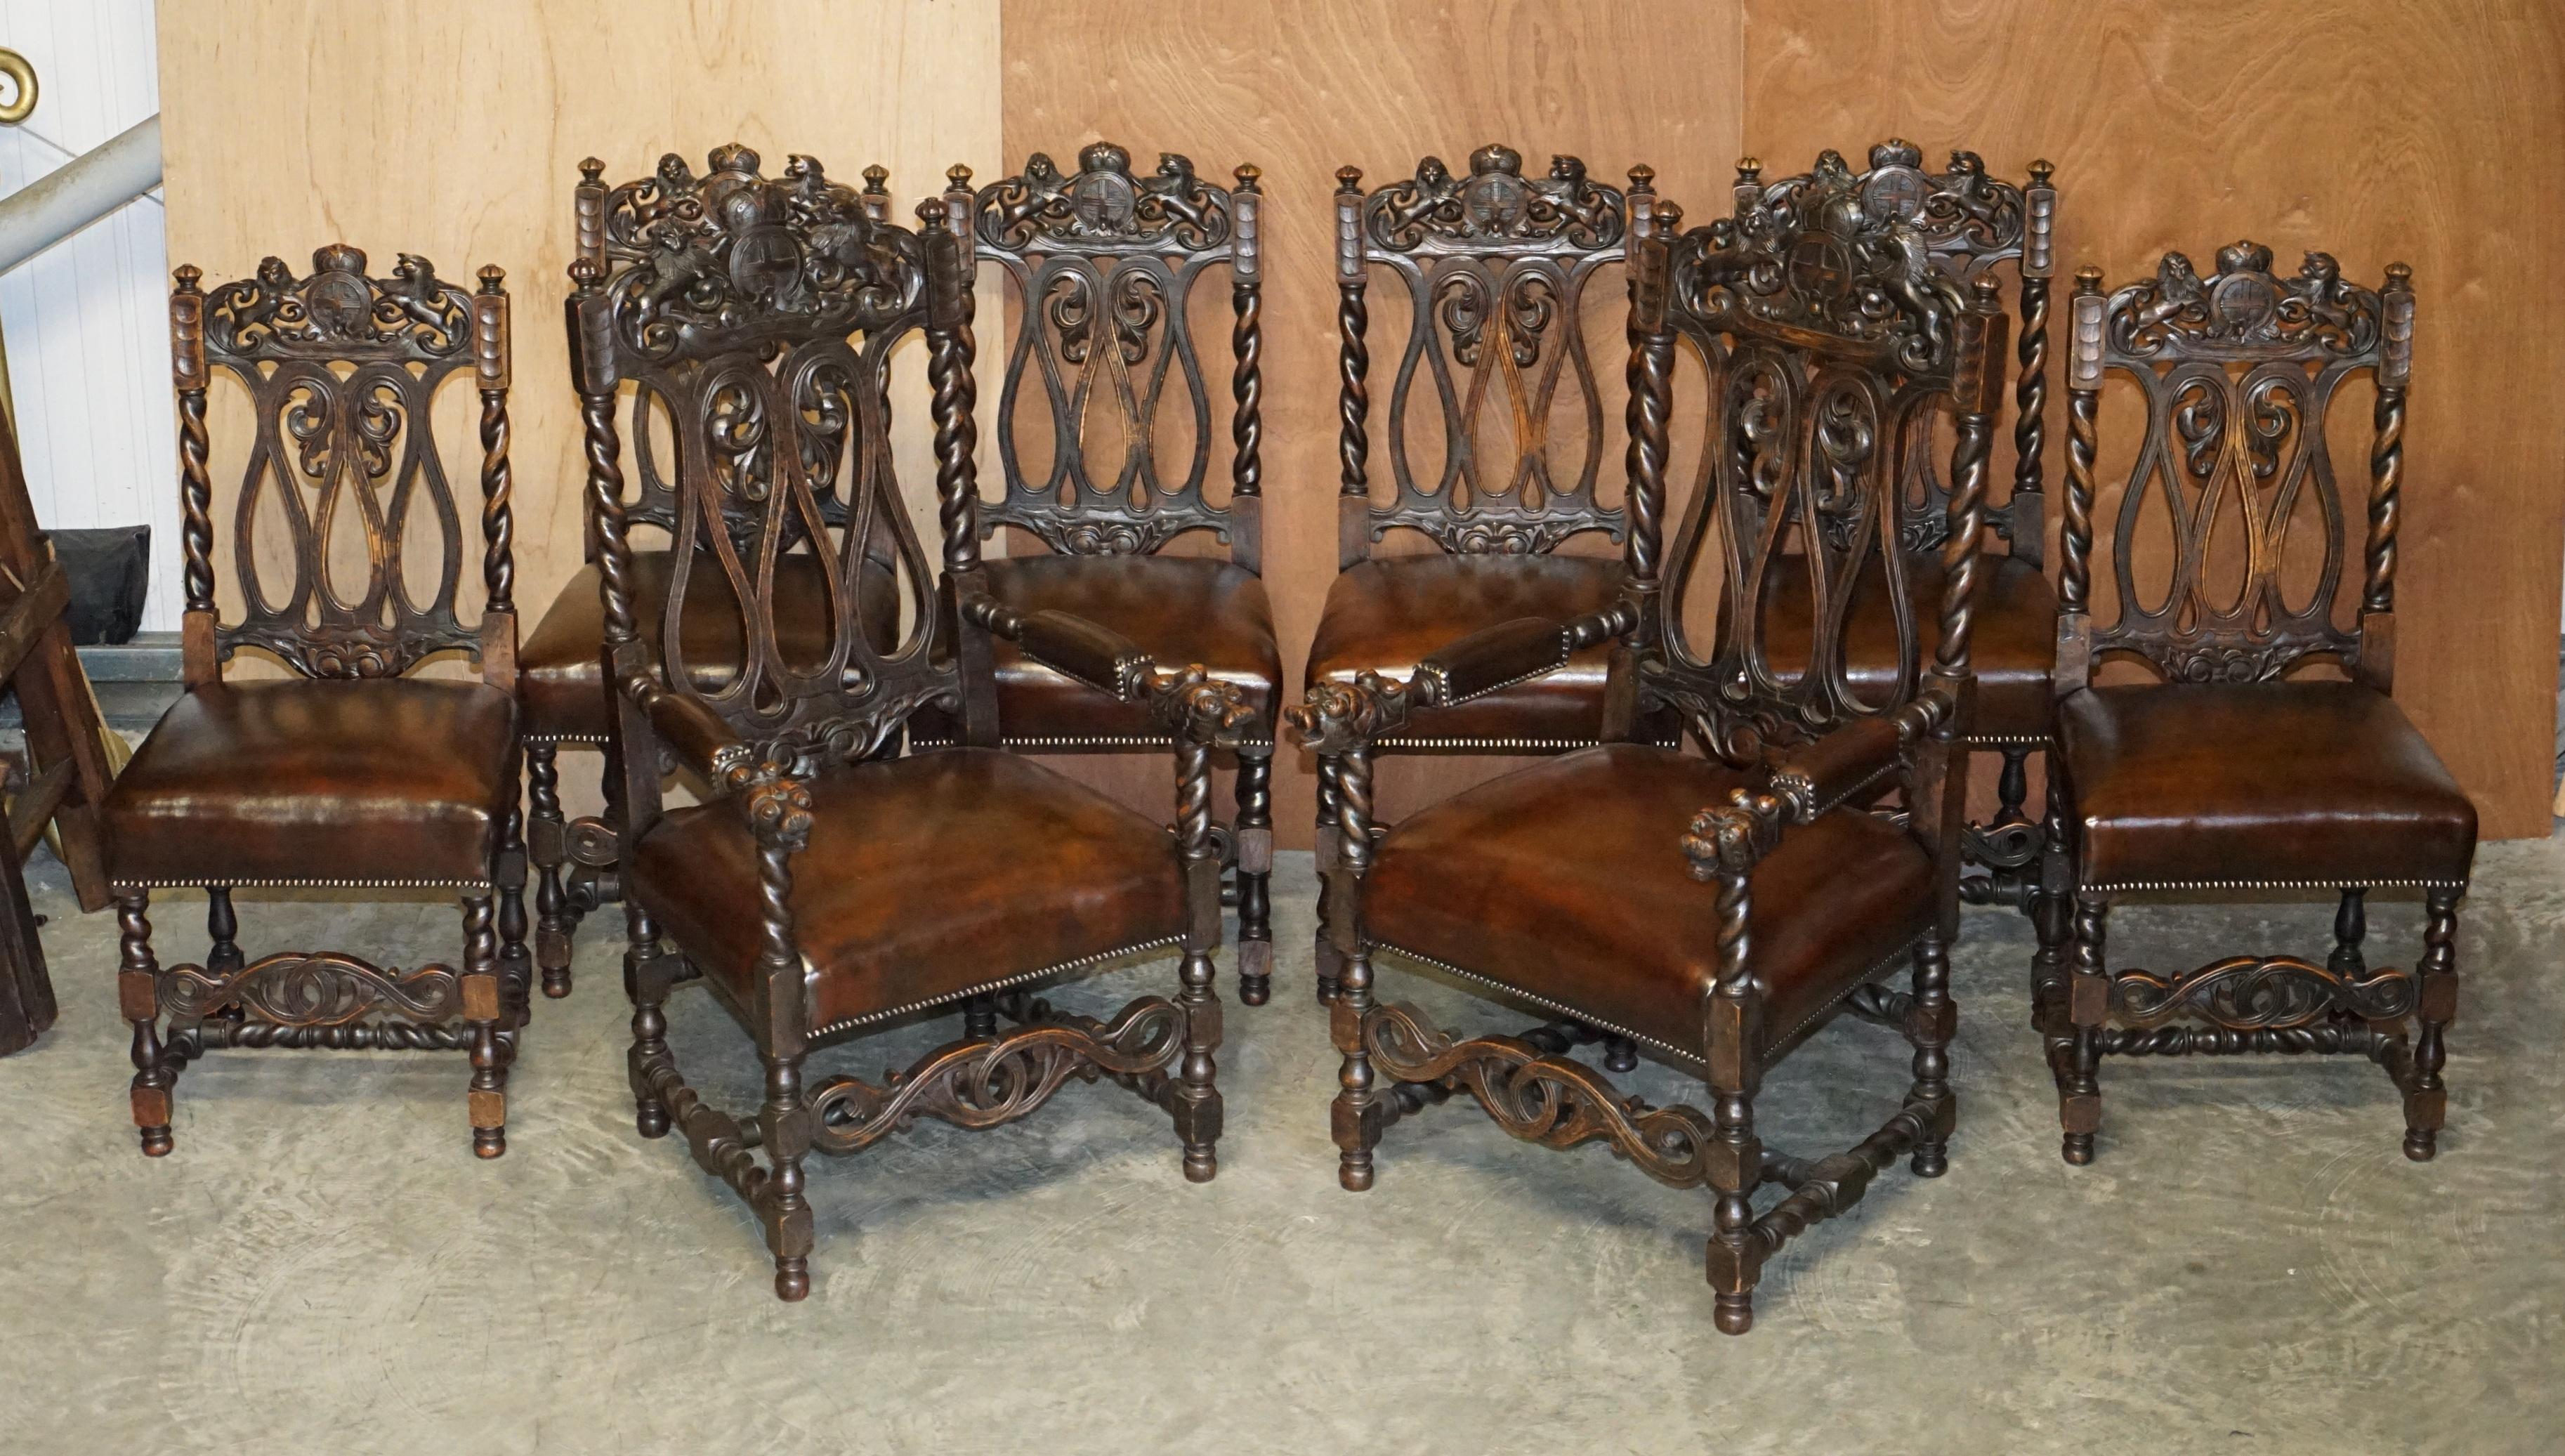 We are delighted to offer this lovely suite of eight original, early Victorian, hand carved Jacobean revival dining chairs with hand carved Armorial crest, Coat of Arms back rests and new leather upholstery which has been hand dyed

A very